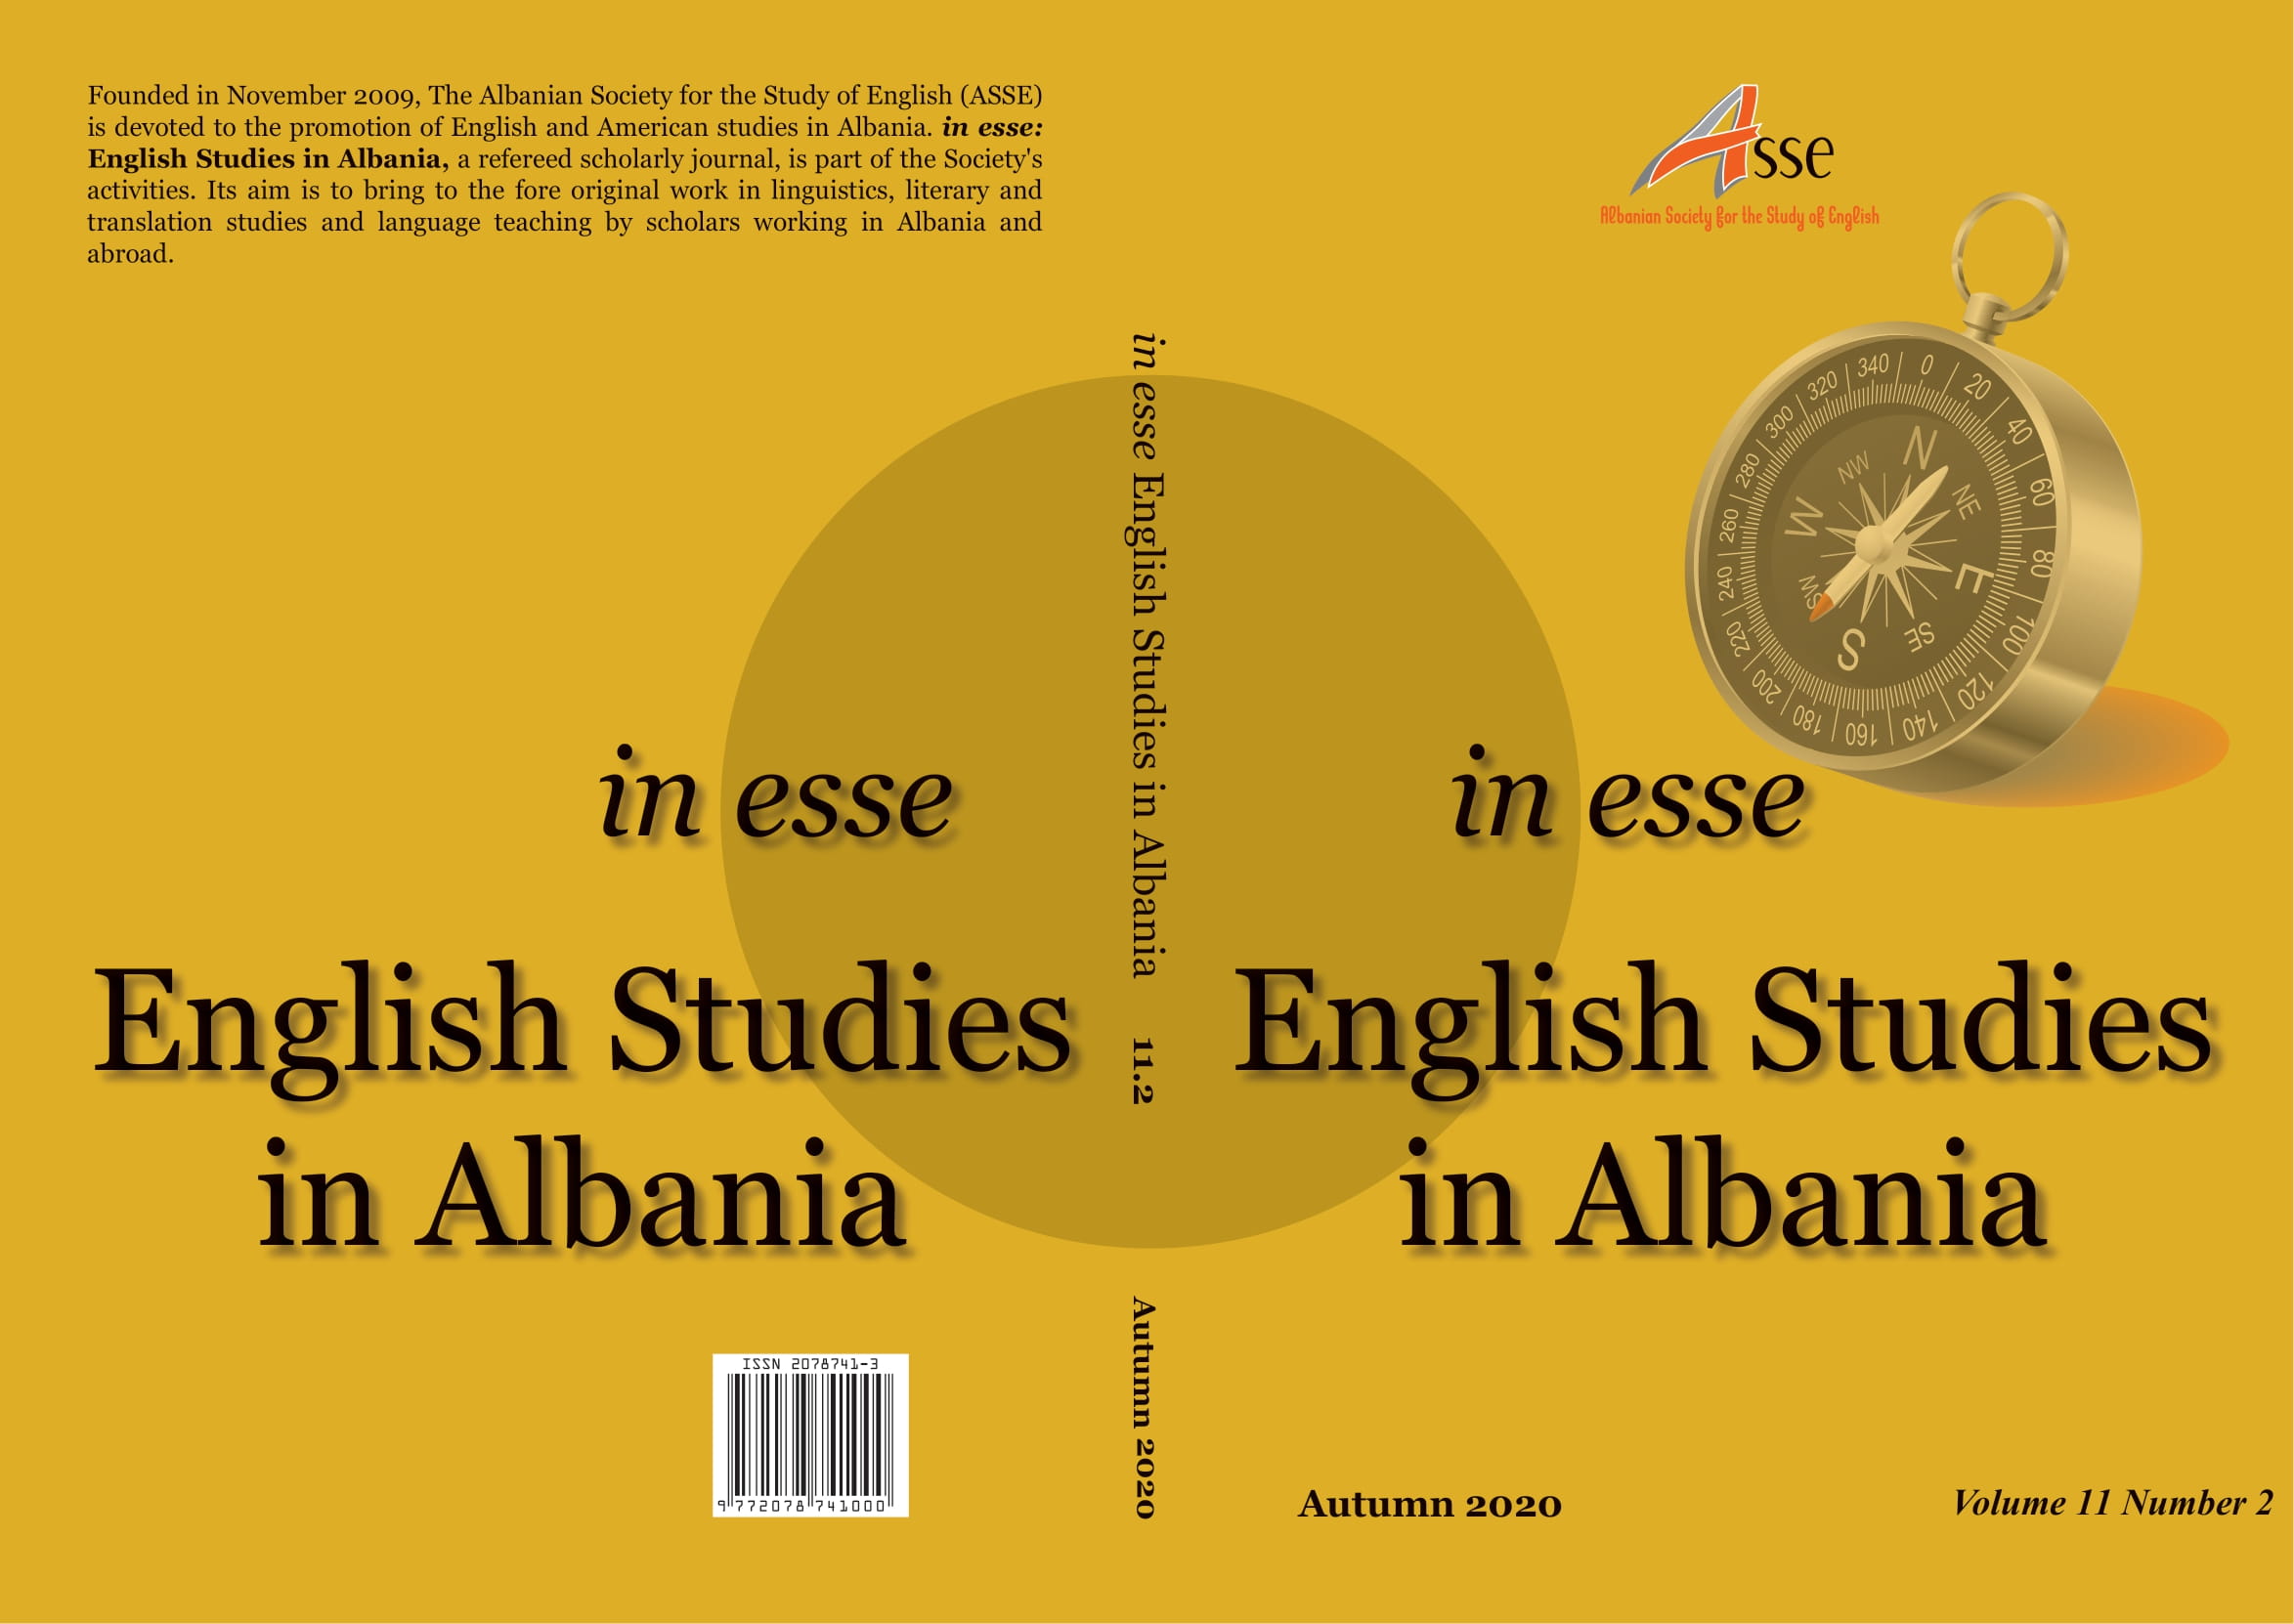 Native language interference in translating from Albanian into English